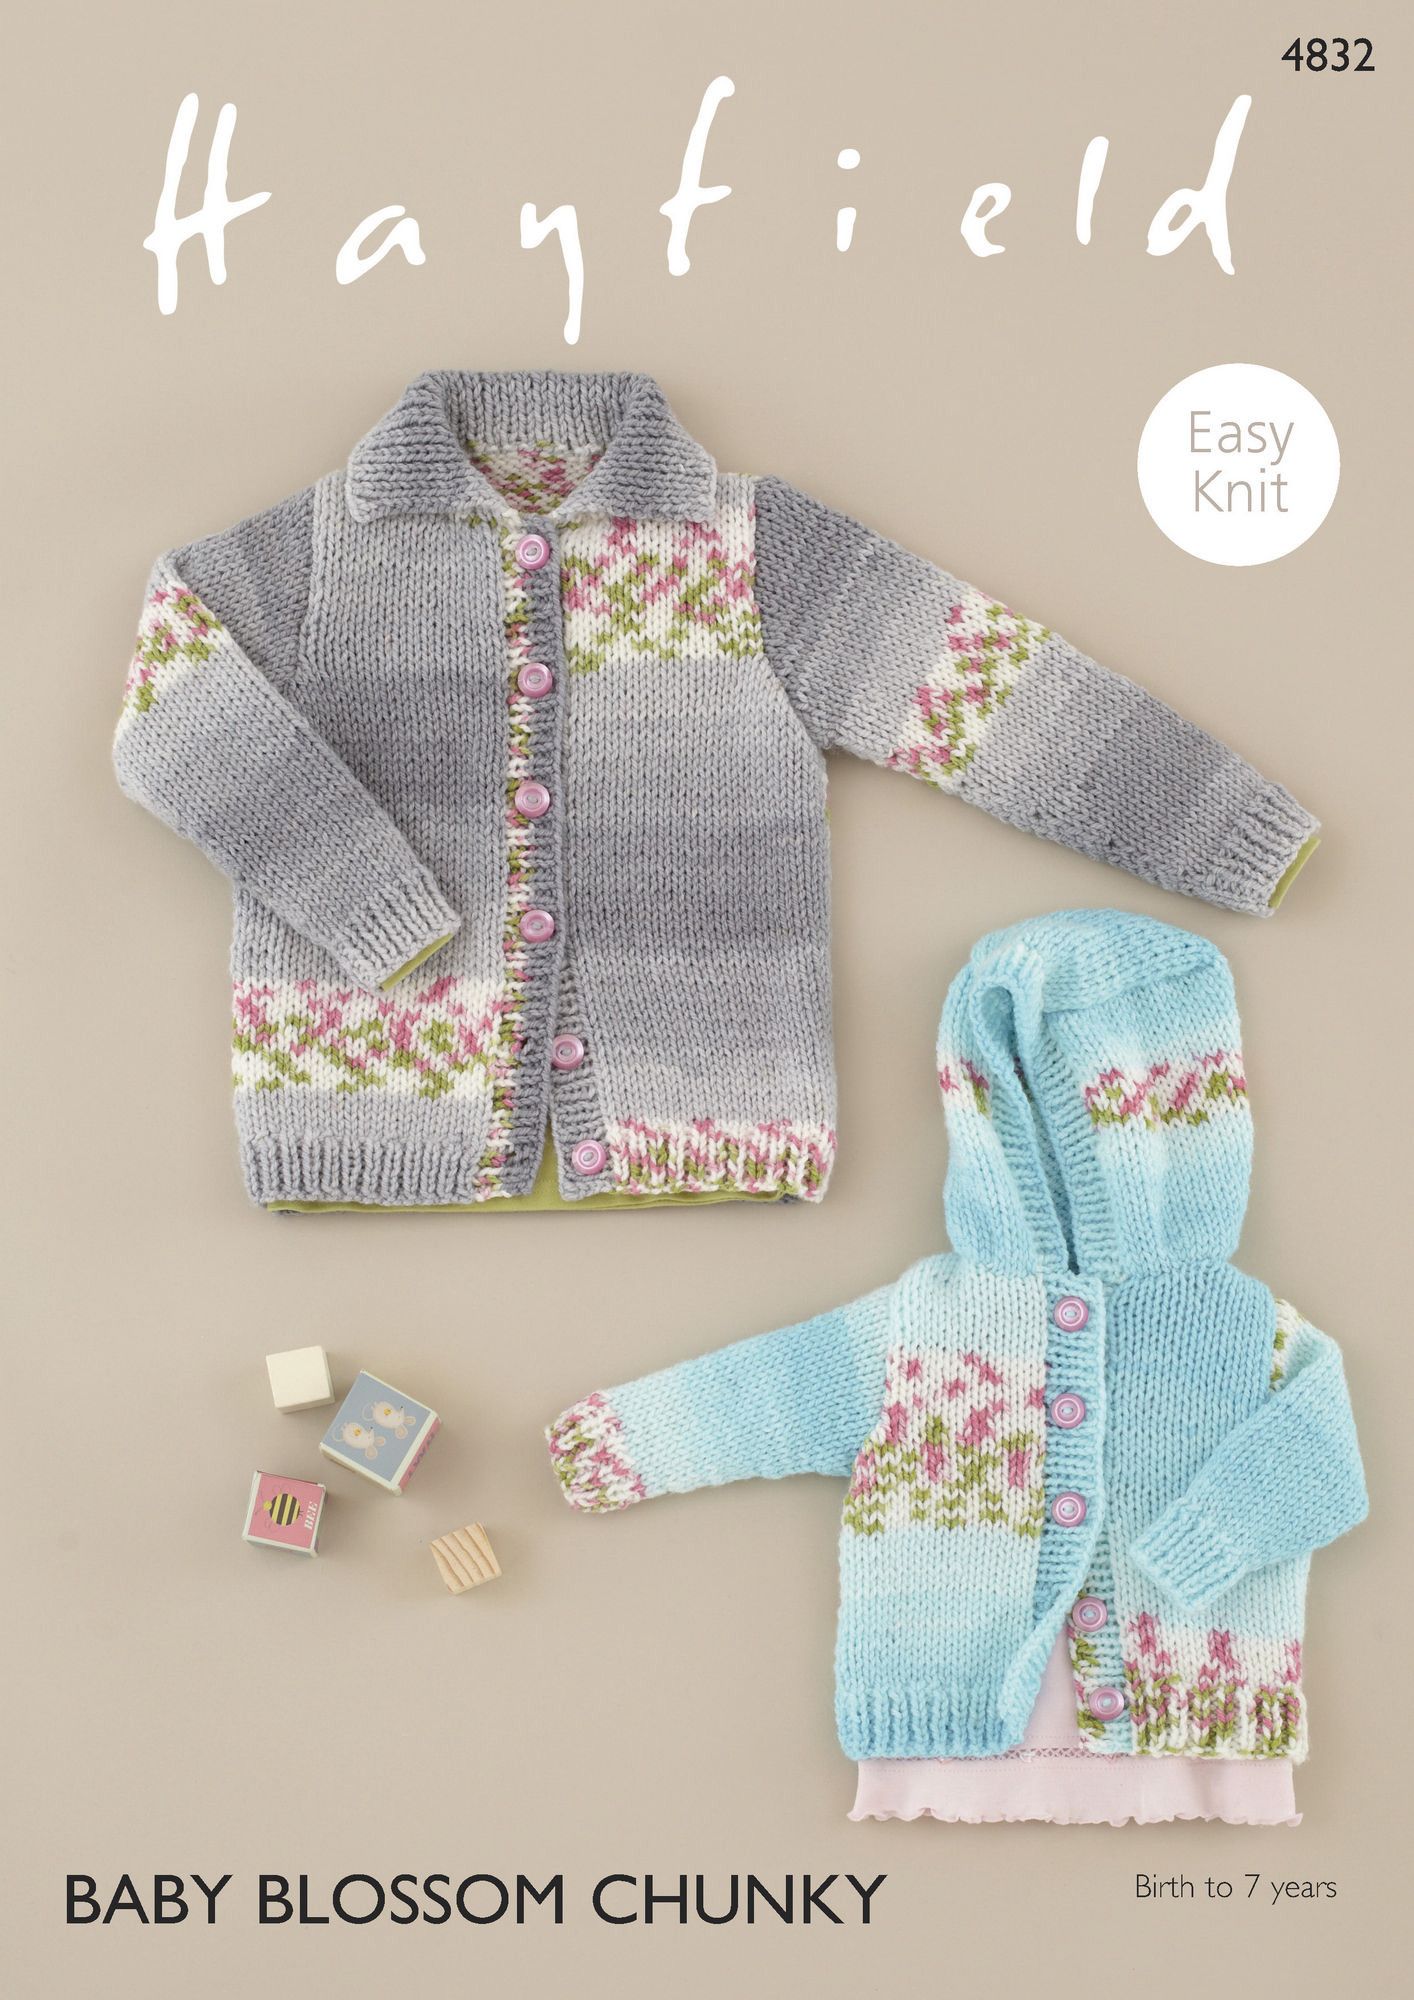 Hayfield Baby Blossom Chunky - Cardigans (4832)